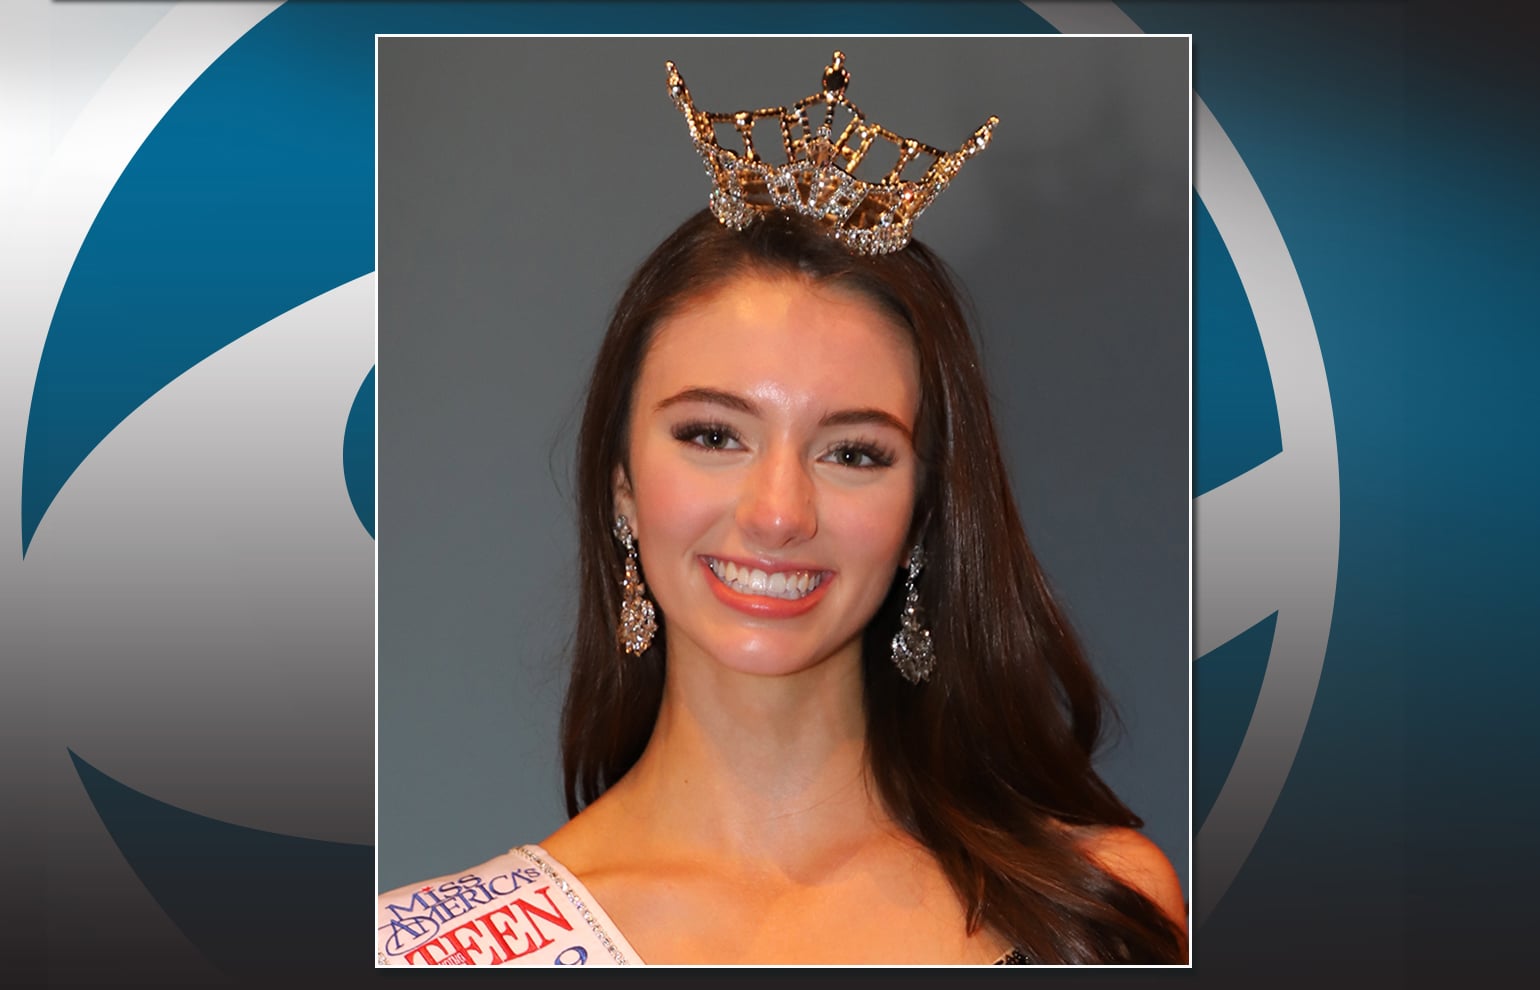 Payton May, a junior at Skyview High School, won the title of Miss Washington's Outstanding Teen and will compete for Miss America's Outstanding Teen at the end of July in Florida.